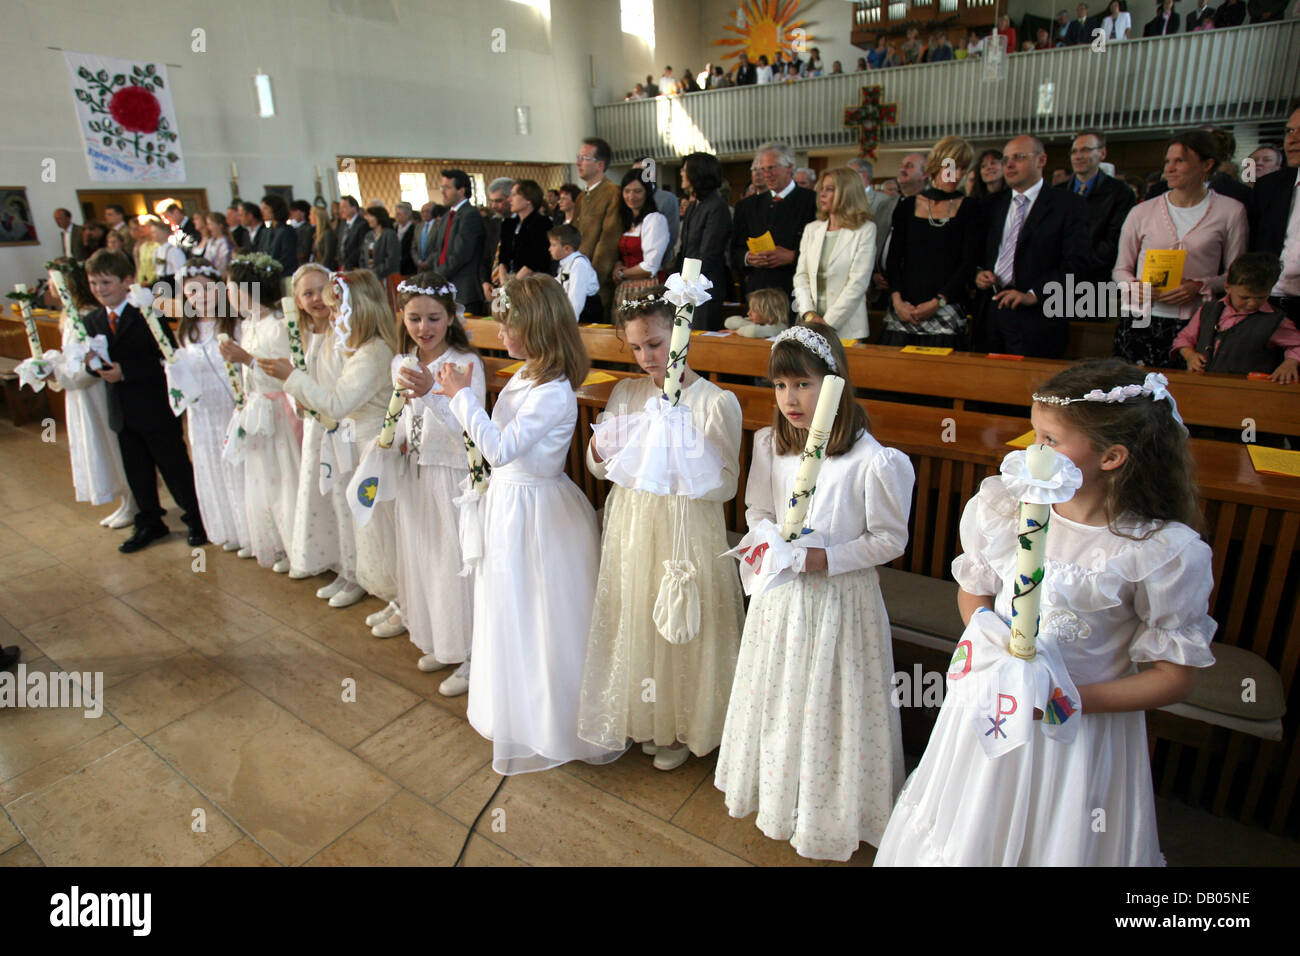 Girls in traditional dresses hold candles during the First Communion  ceremony at Catholic Saint Peter and Paul church in Baierbrunn, Germany, 15  April 2007. Photo: Stephan Jansen Stock Photo - Alamy